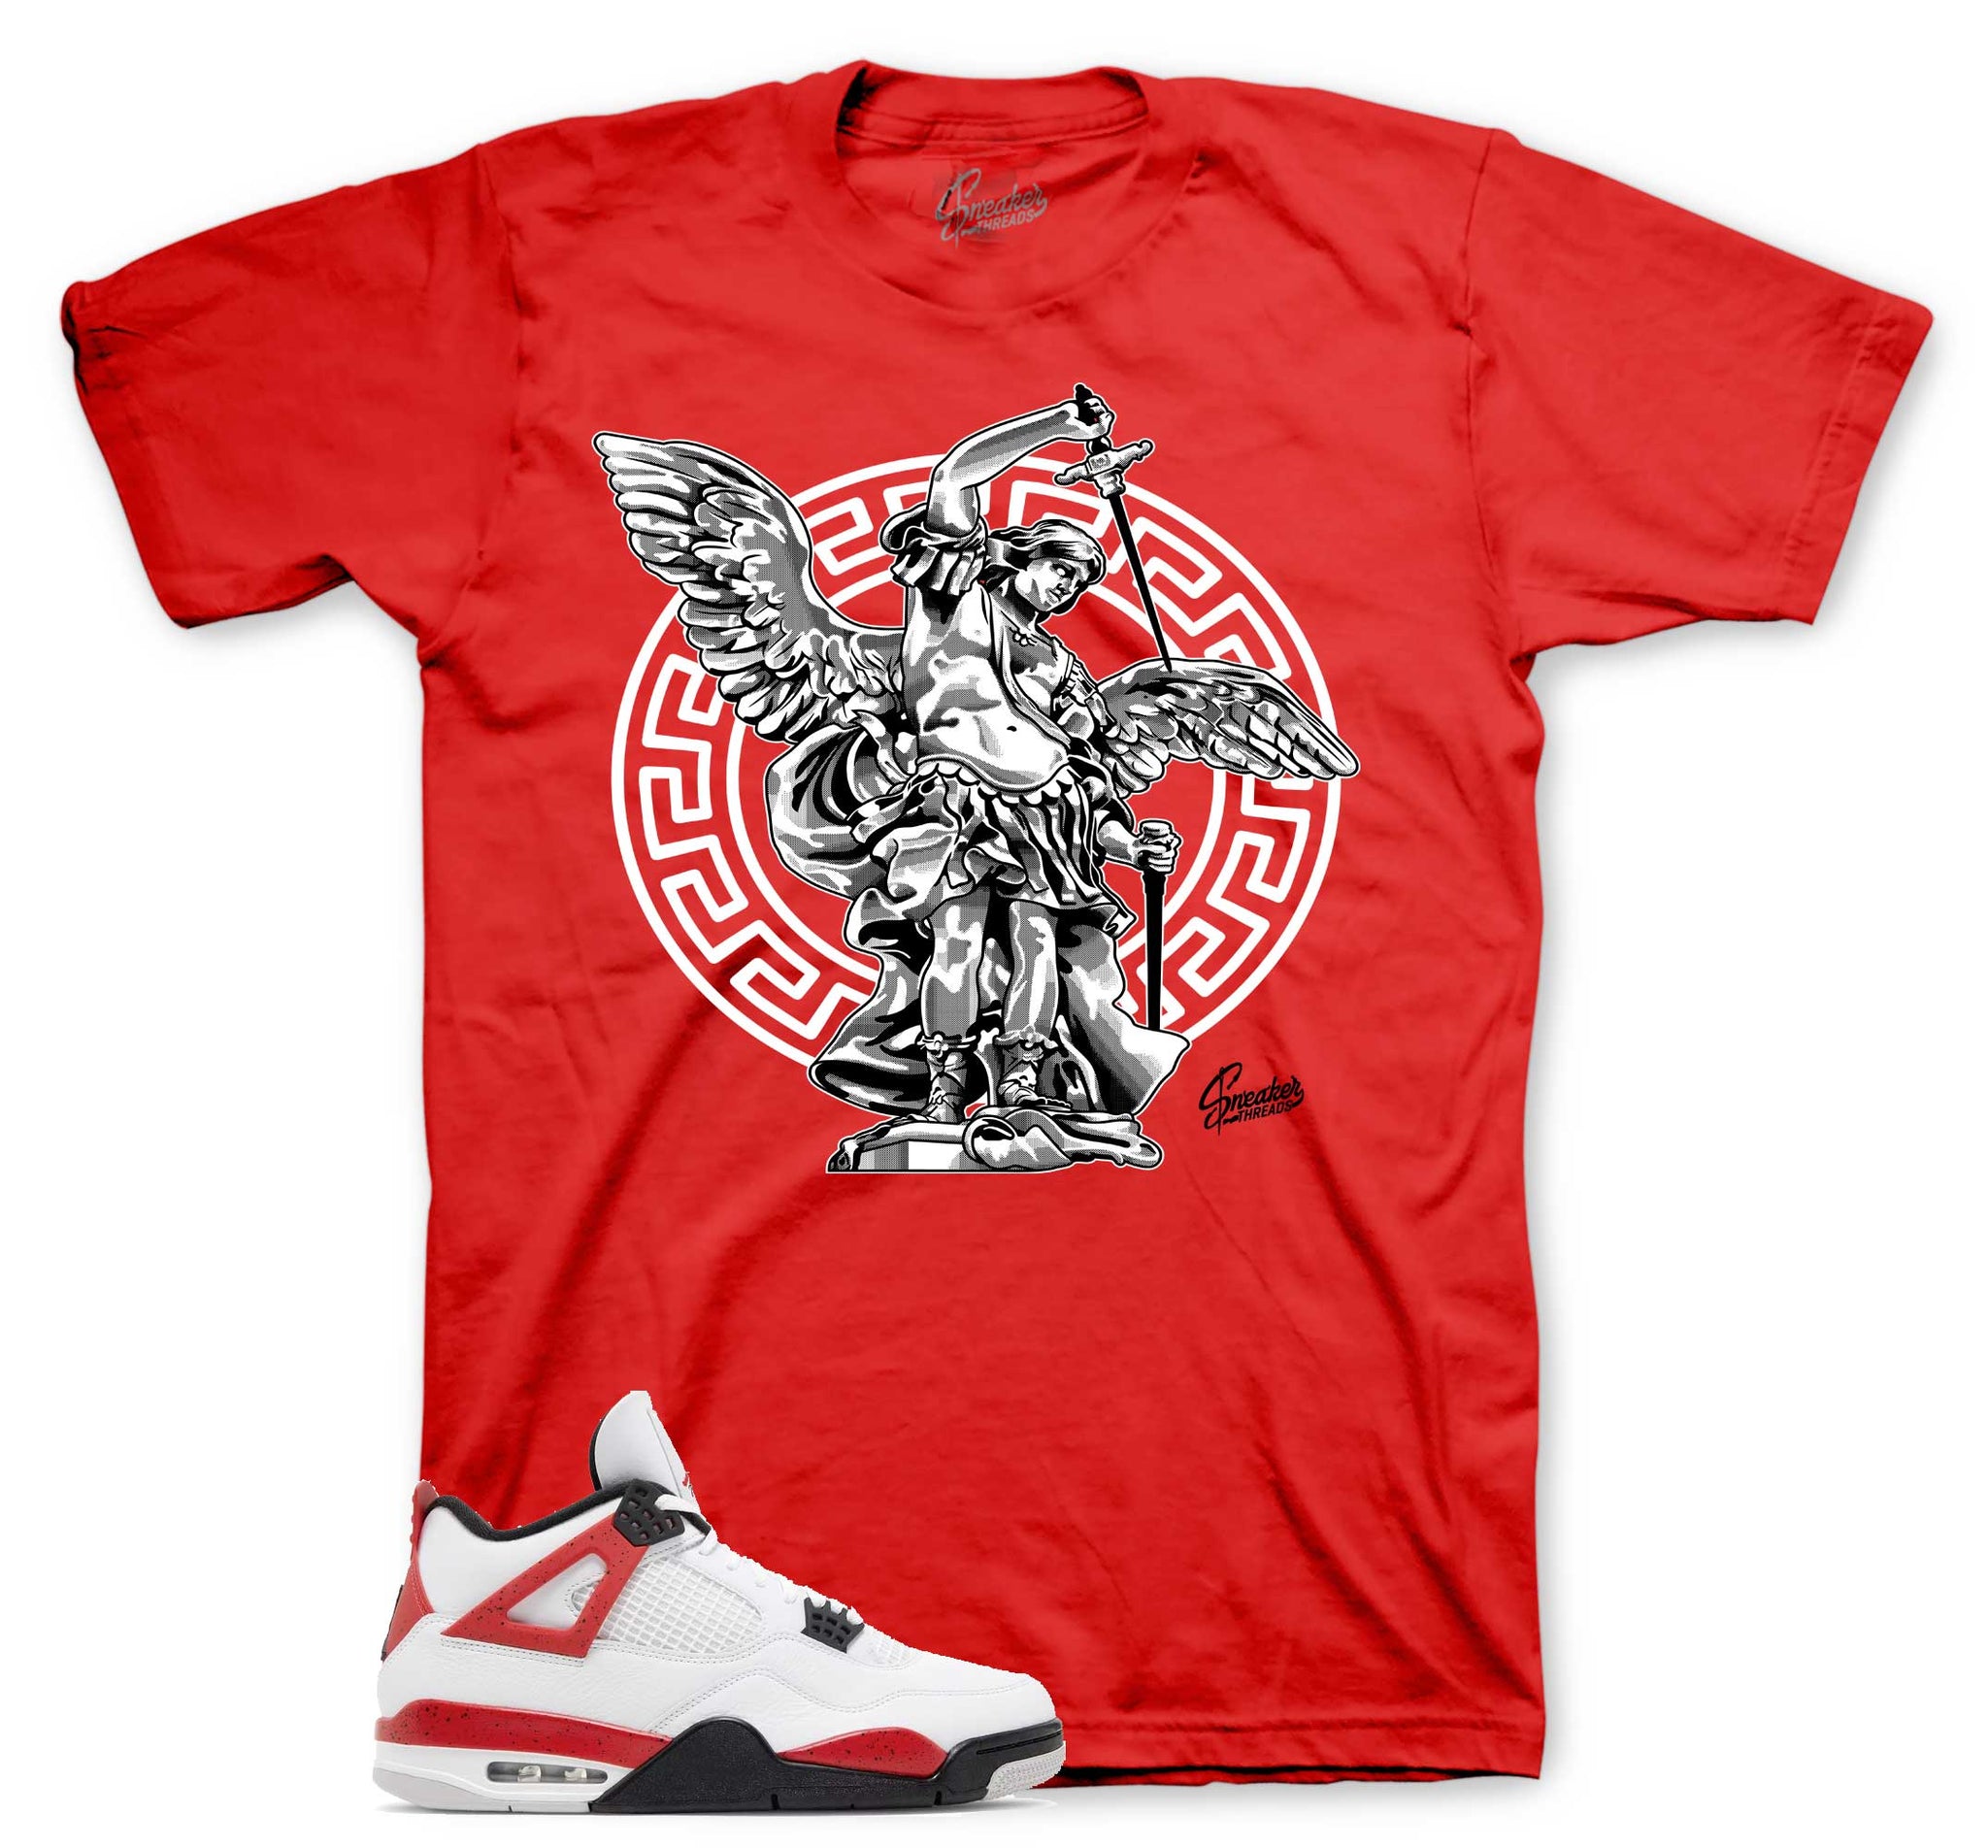 Retro 4 Red Cement Shirt - St. Micheal - Red